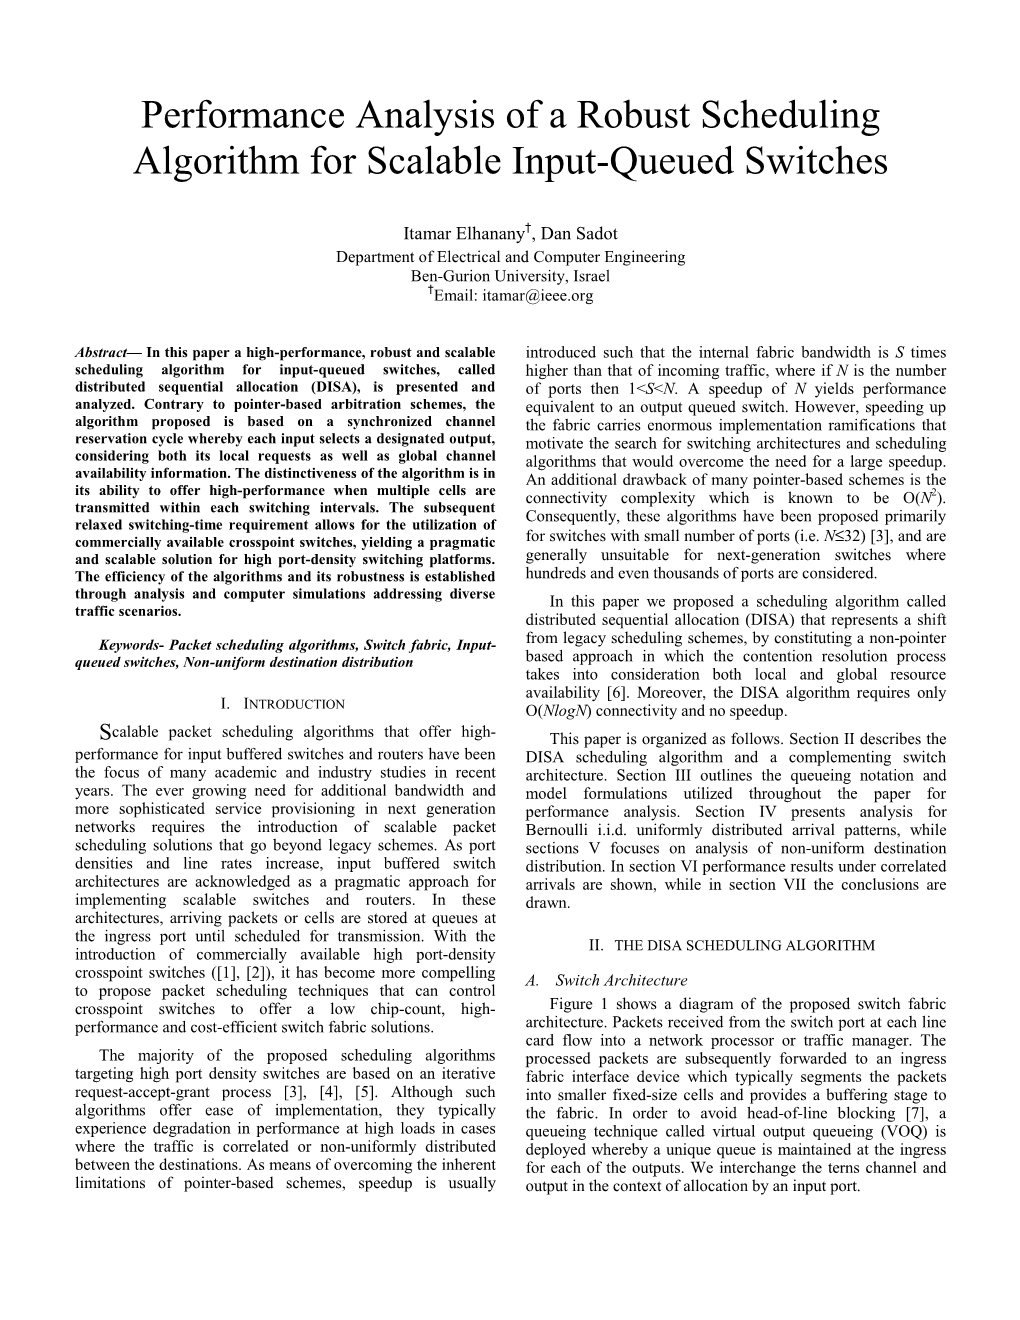 Performance Analysis of a Robust Scheduling Algorithm for Scalable Input-Queued Switches